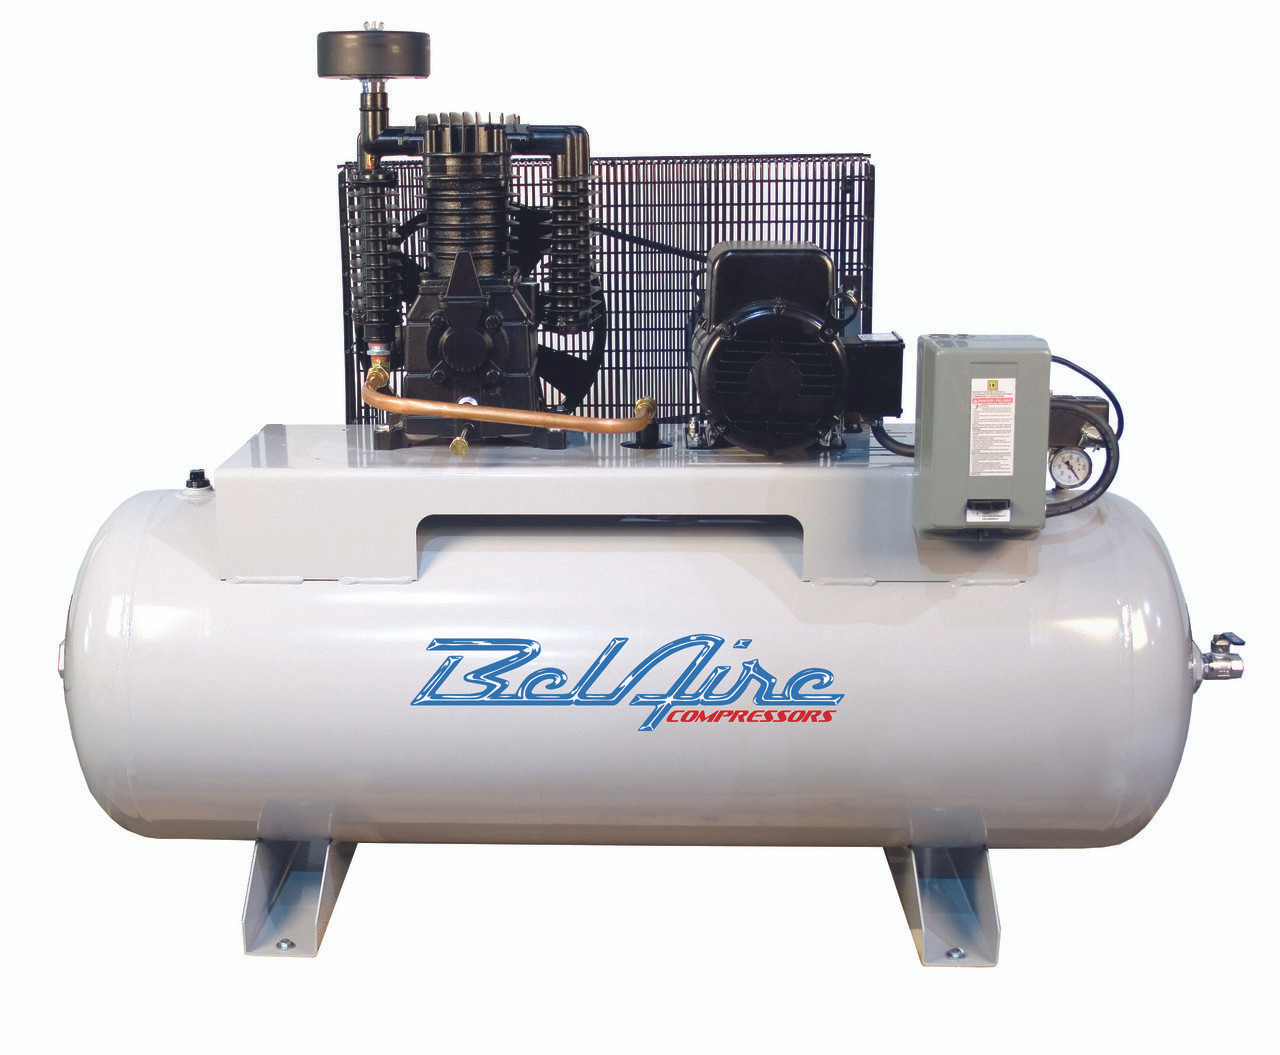 BelAire 338HLE 7.5 HP 208-230 Volt Three Phase Two Stage 80 Gallon Full Featured Air Compressor